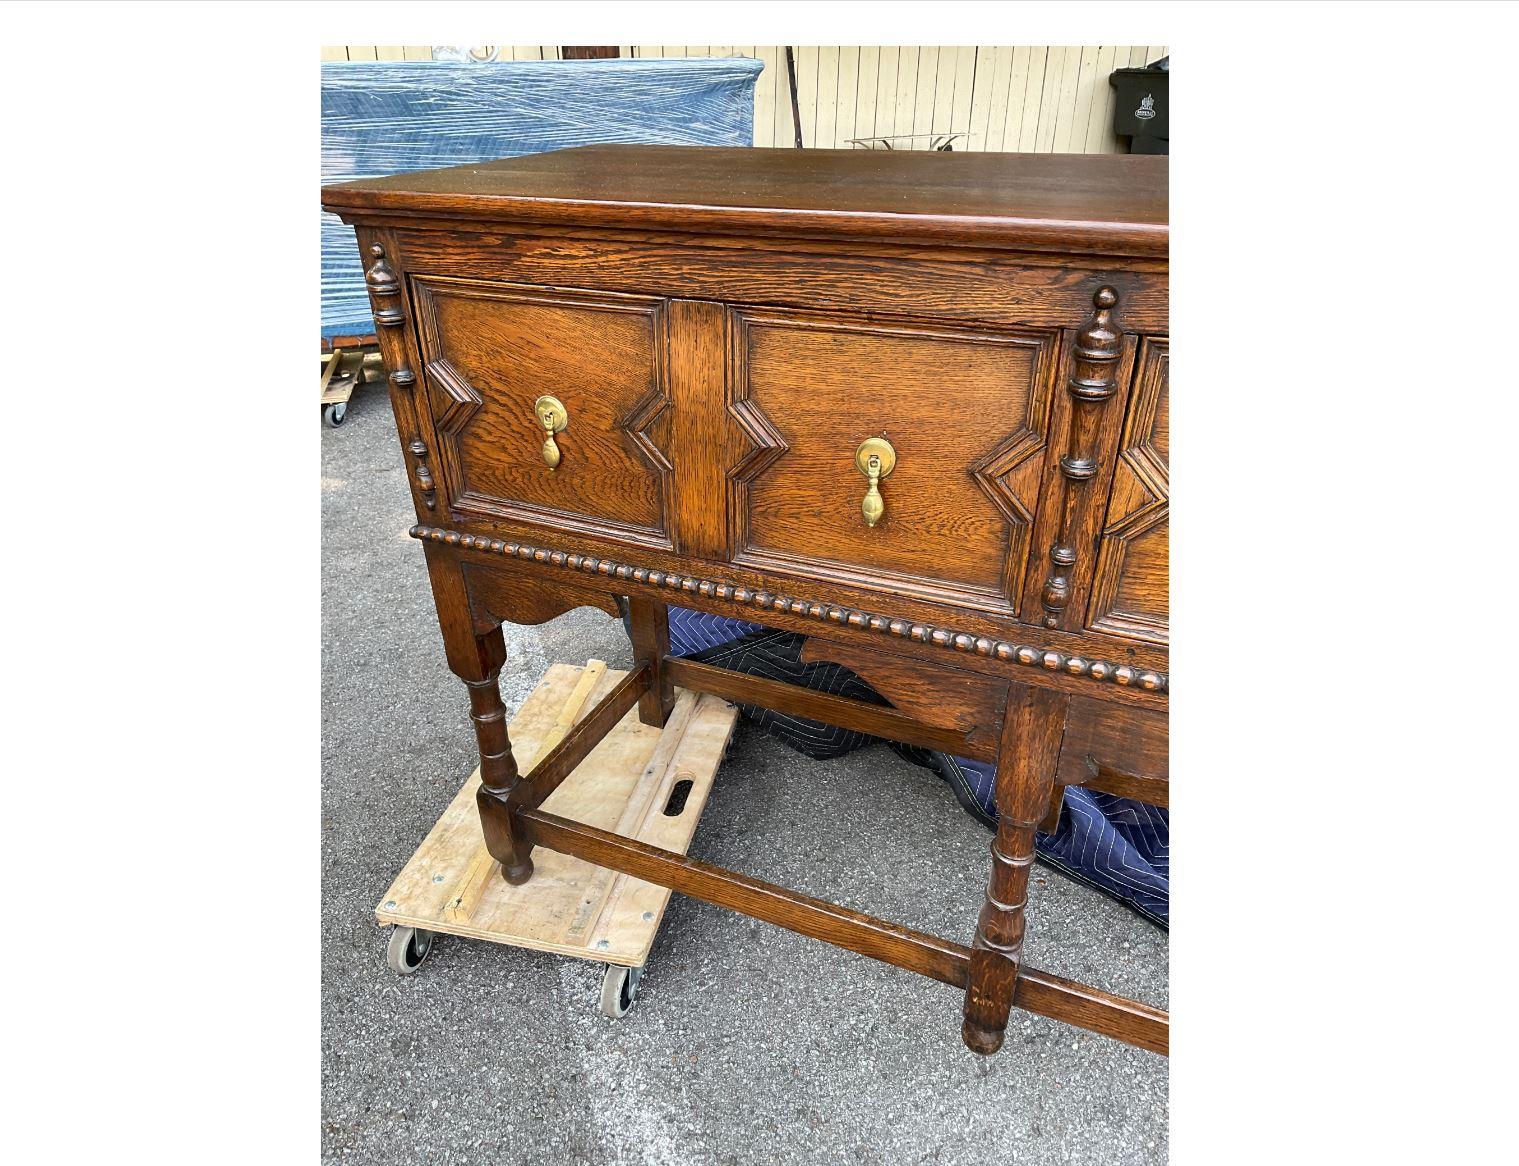 This amazing English server has such an aura of old-world charm about it. It is from the Jacobean period, dating to the 1800s, and has an excellent patina. The server has beautifully done geometric drawer fronts with original pulls, and a wooden